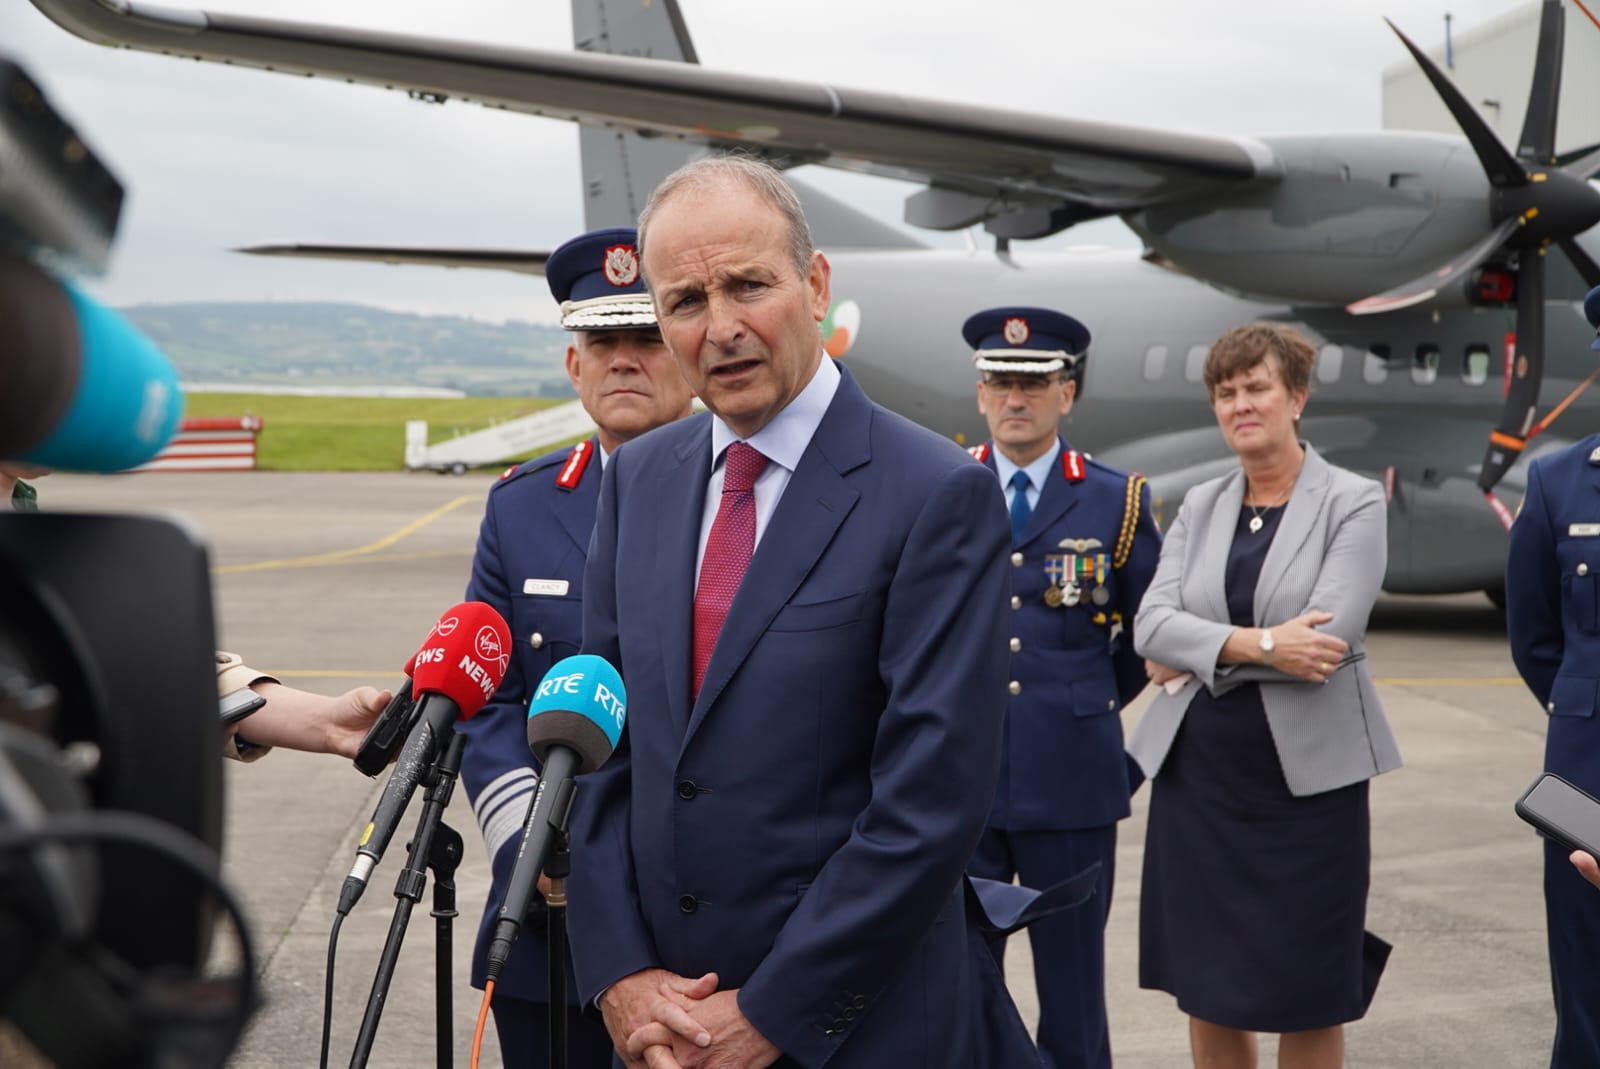 Tánaiste and Minister for Defence Micheál Martin welcomes the arrival of the first of two Airbus C295 Maritime Patrol Aircraft